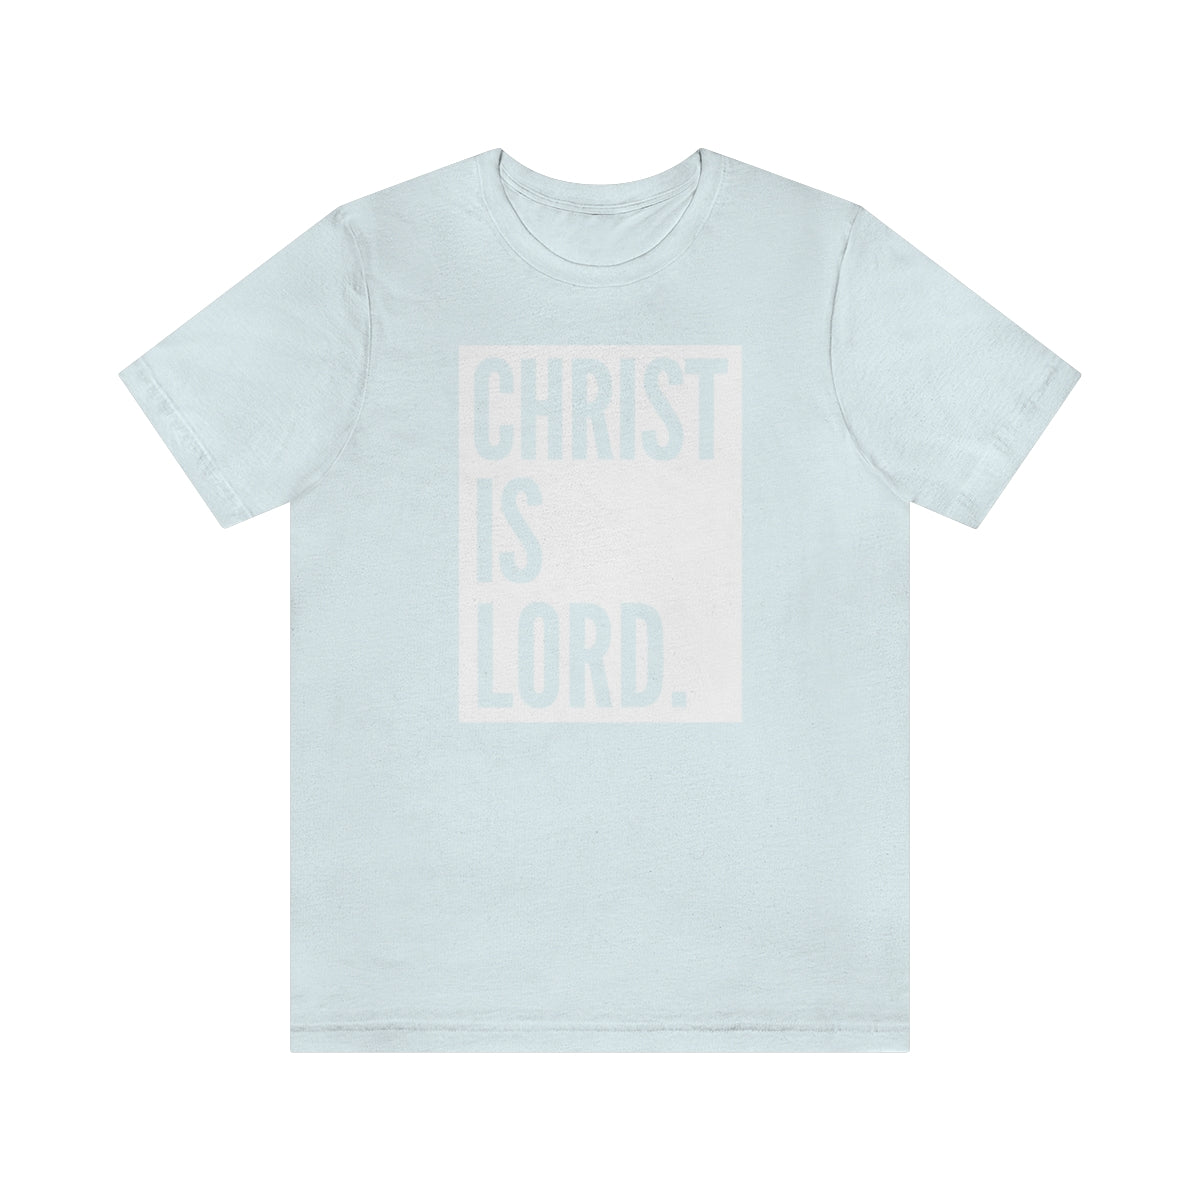 Gospel Affiliated Christ Is Lord Large Design Unisex Jersey Short Sleeve Tee